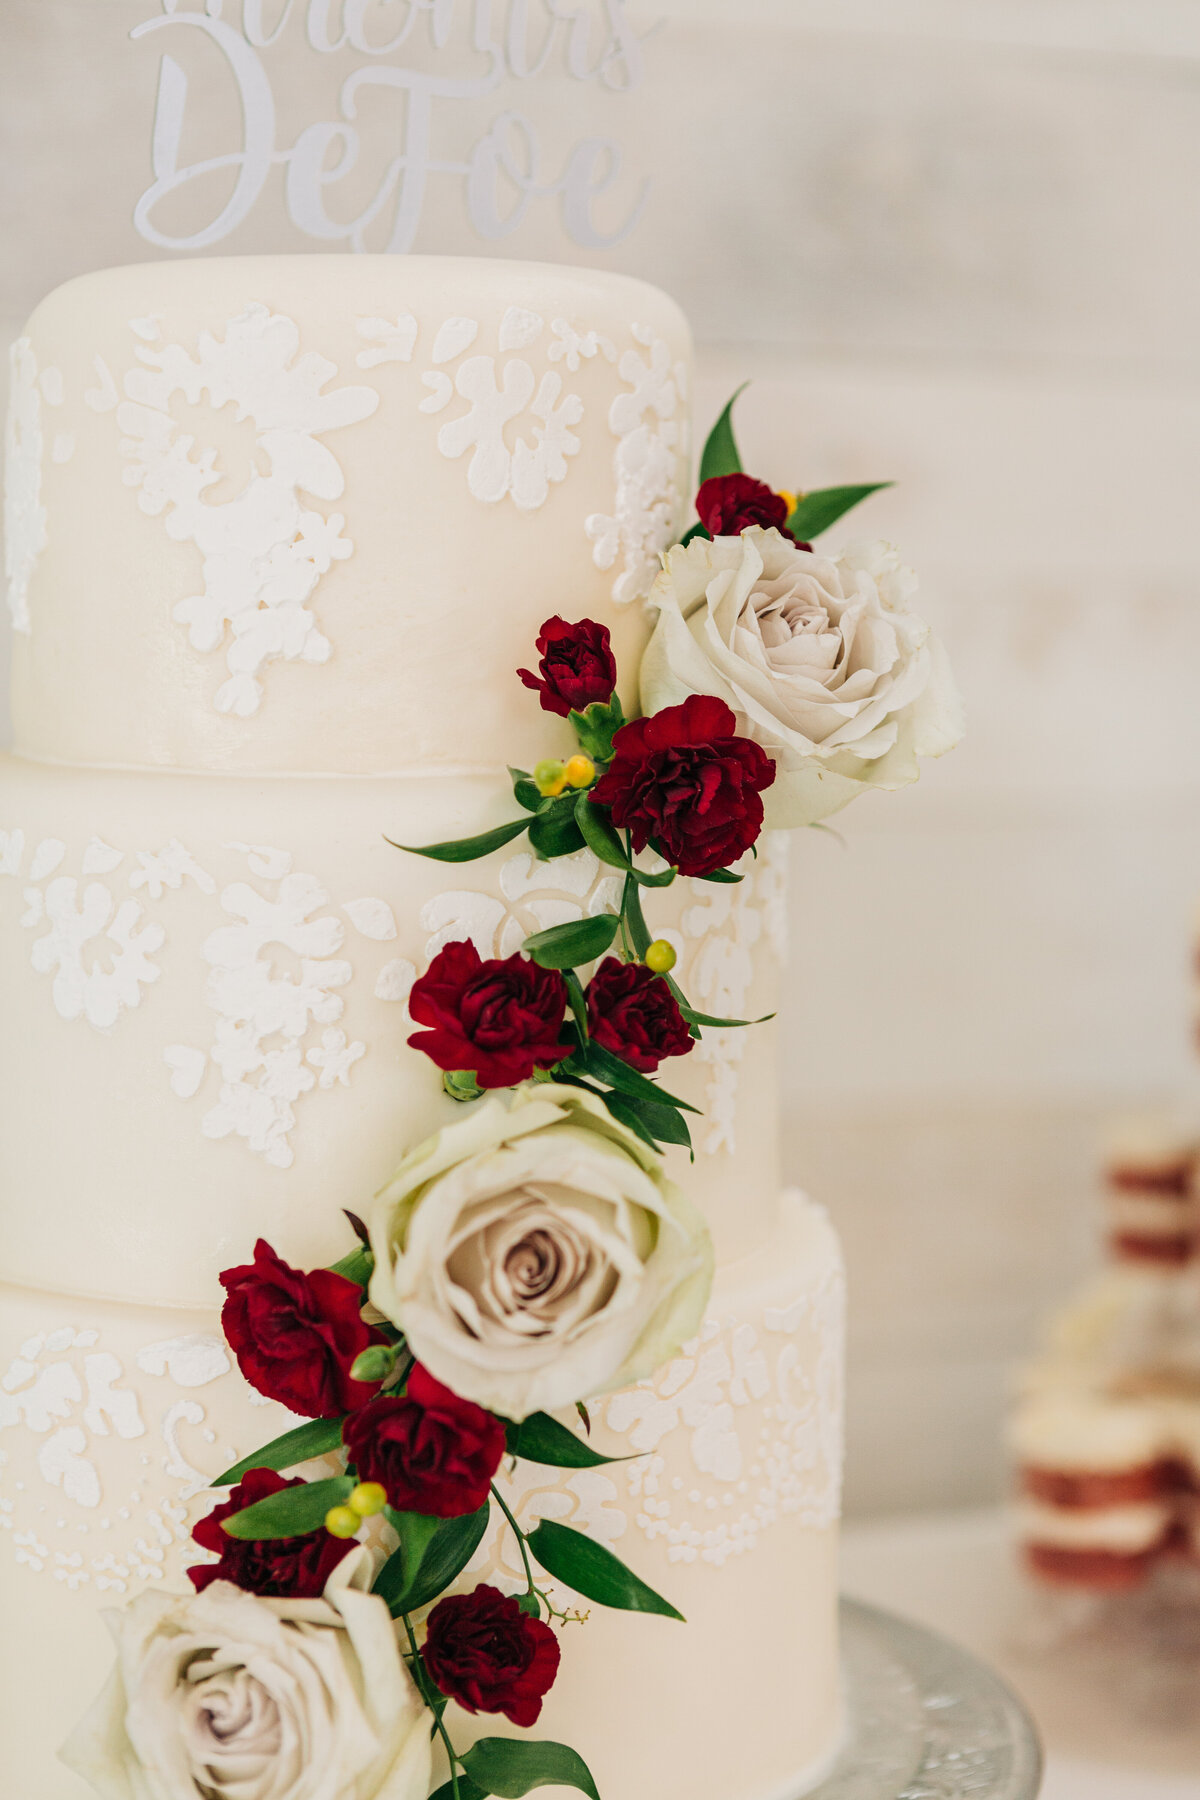 Roses and carnations on cake